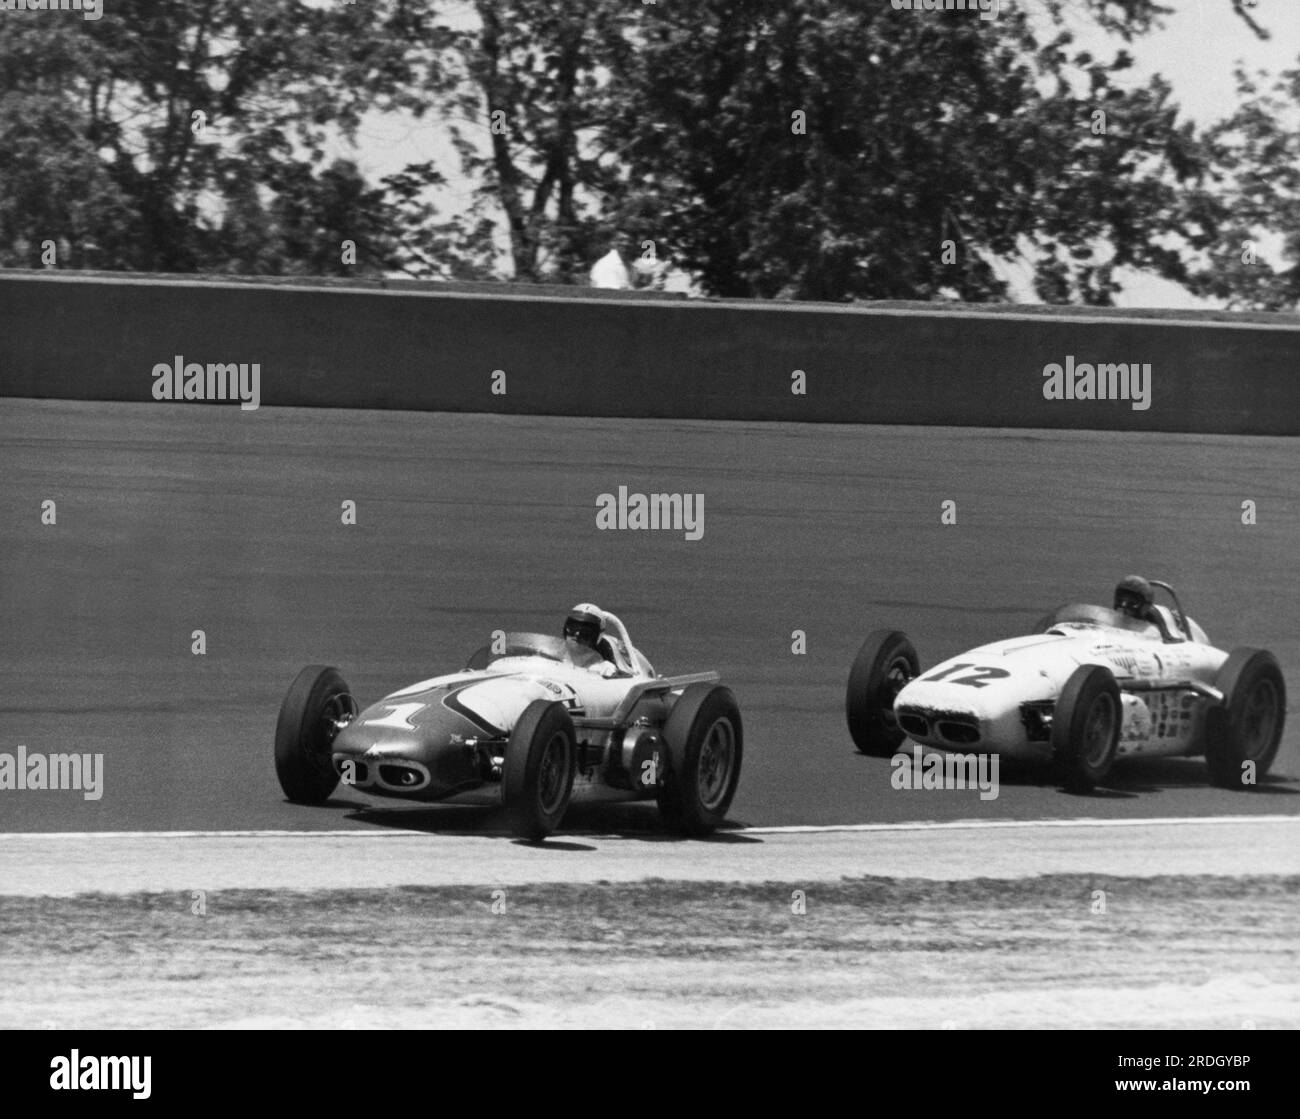 Indianapolis, Indiana:  May, 1961 Race car driver A.J. Foyt leading Eddie Sachs through turn #1 at the Indianapolis Speedway 500 race track. Stock Photo